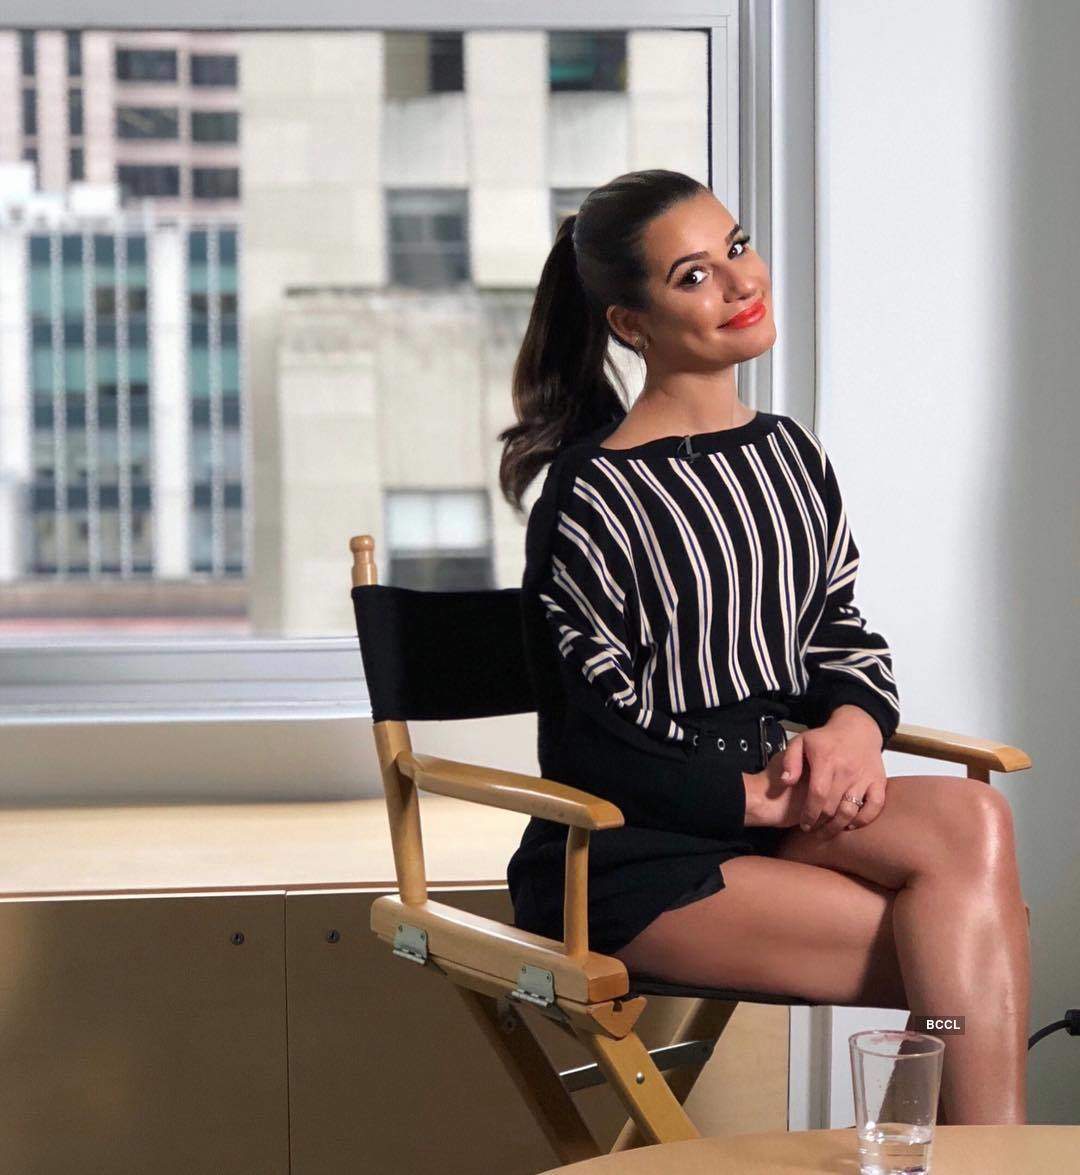 Glamorous pictures of American actress & singer Lea Michele